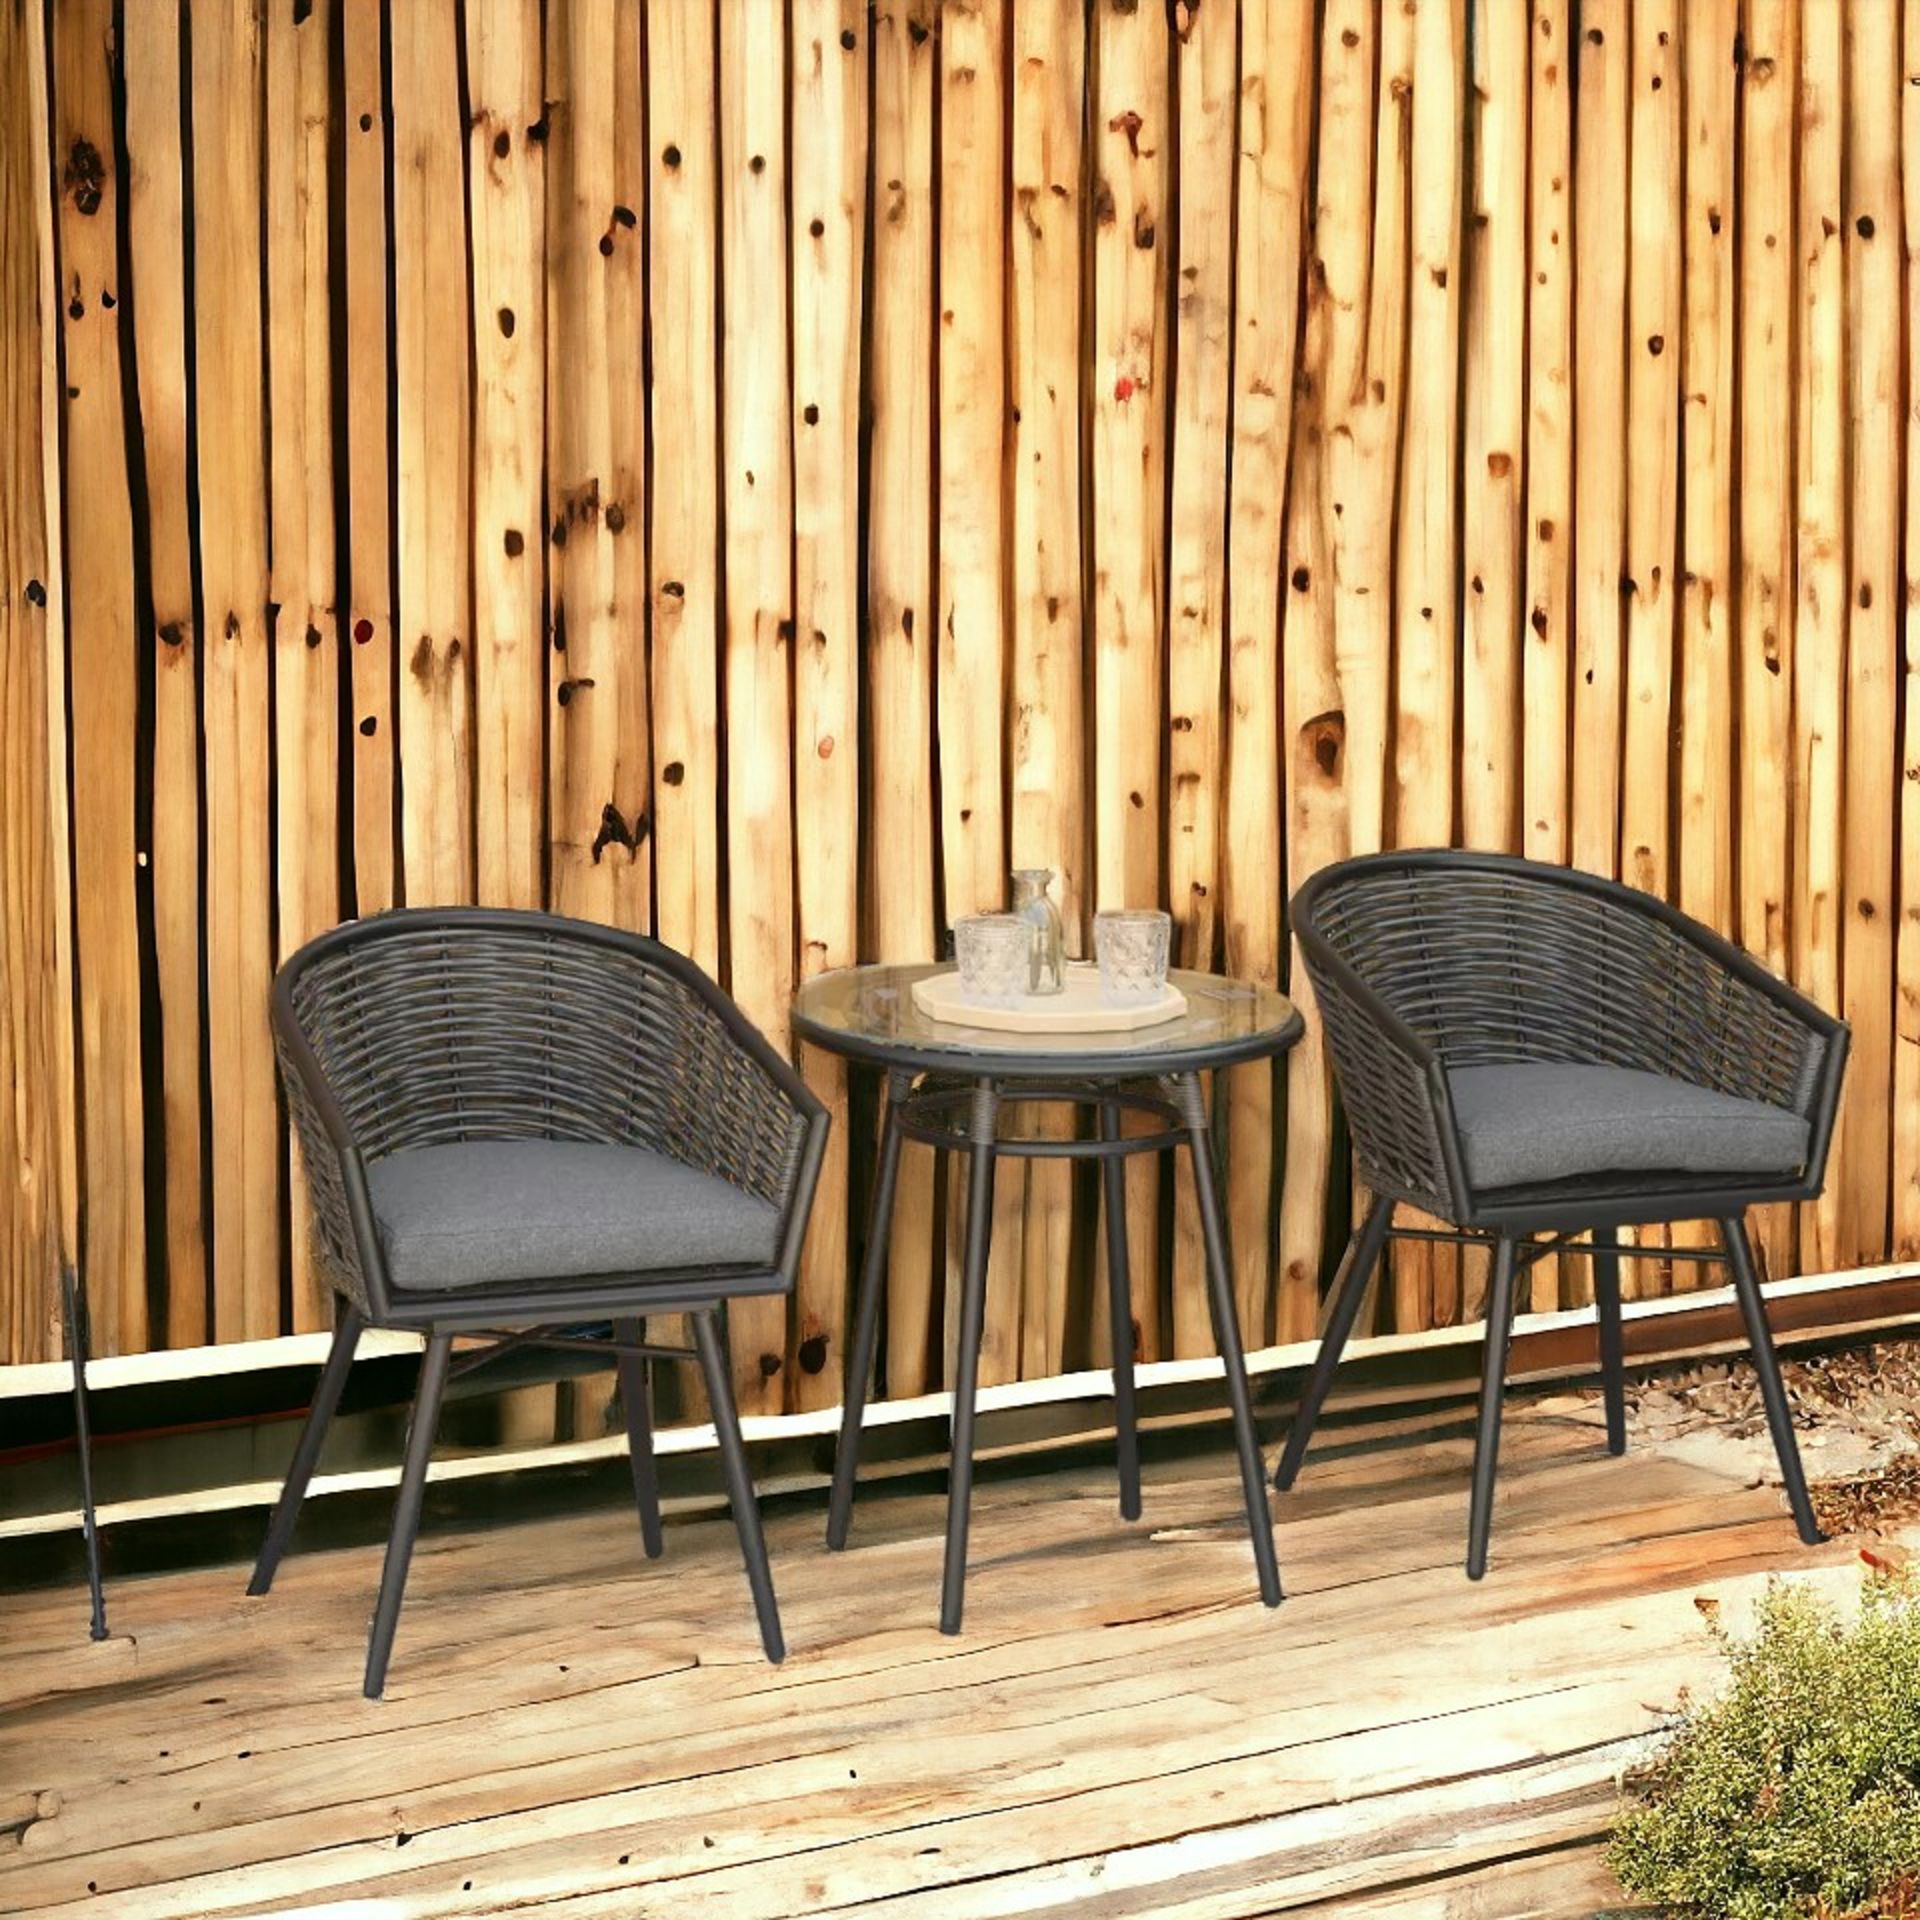 FREE DELIVERY - BRAND NEW 3 PCS PATIO RESIN WICKER HAND WOVEN BISTRO SET 2 CHAIRS 1 COFFEE TABLE - Bild 2 aus 2